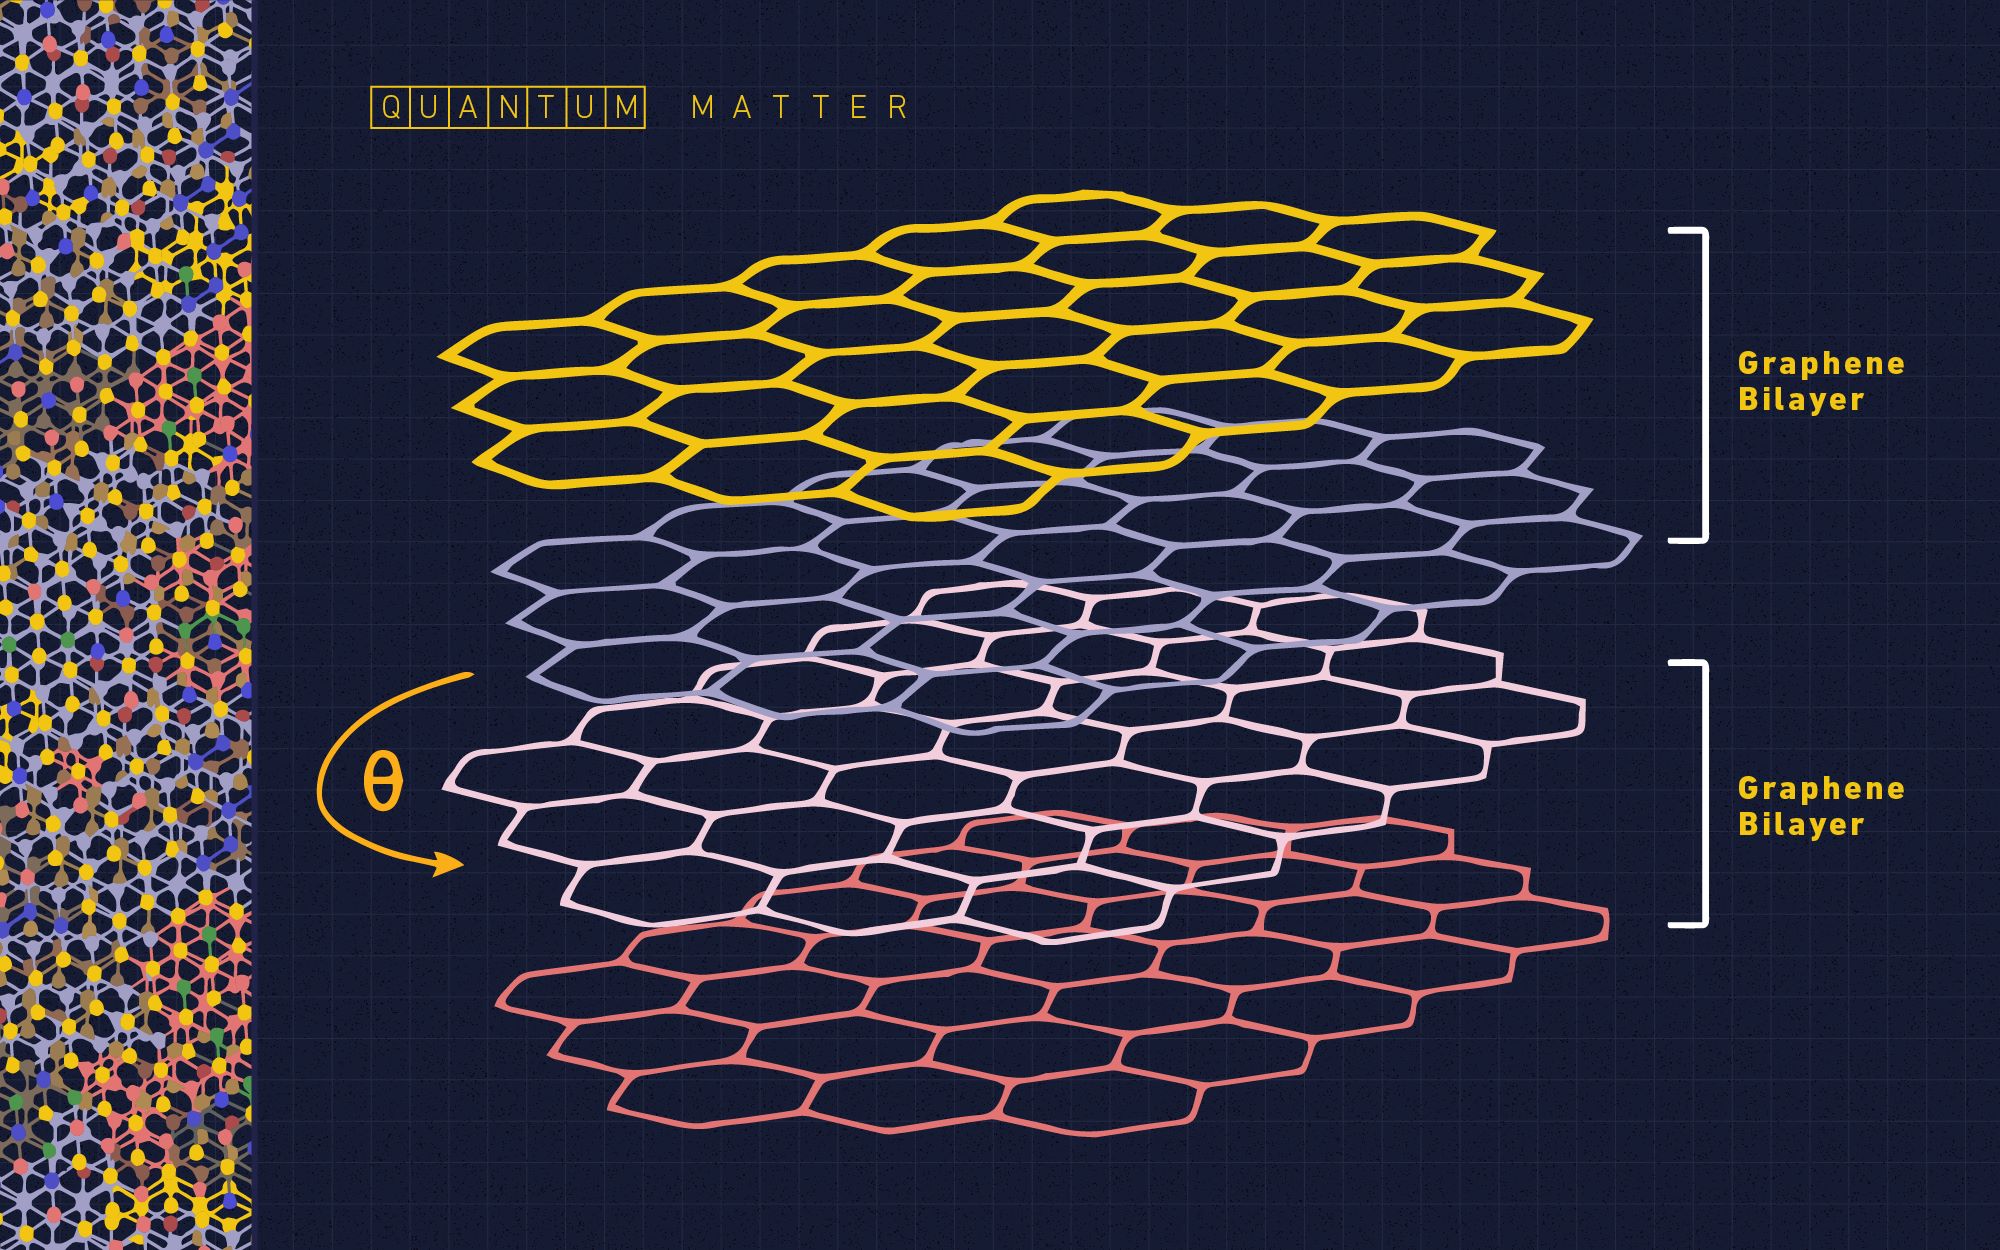 two bilayers (two double layers) of graphene